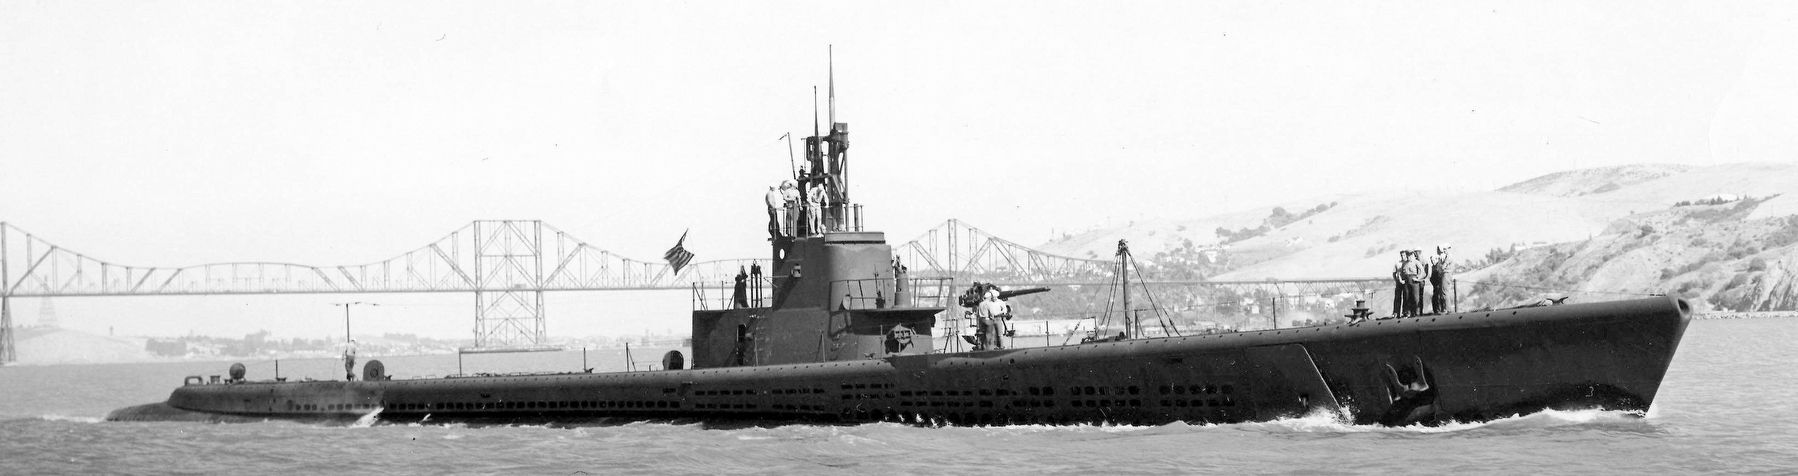 USS Gato, class leader. image. Click for full size.